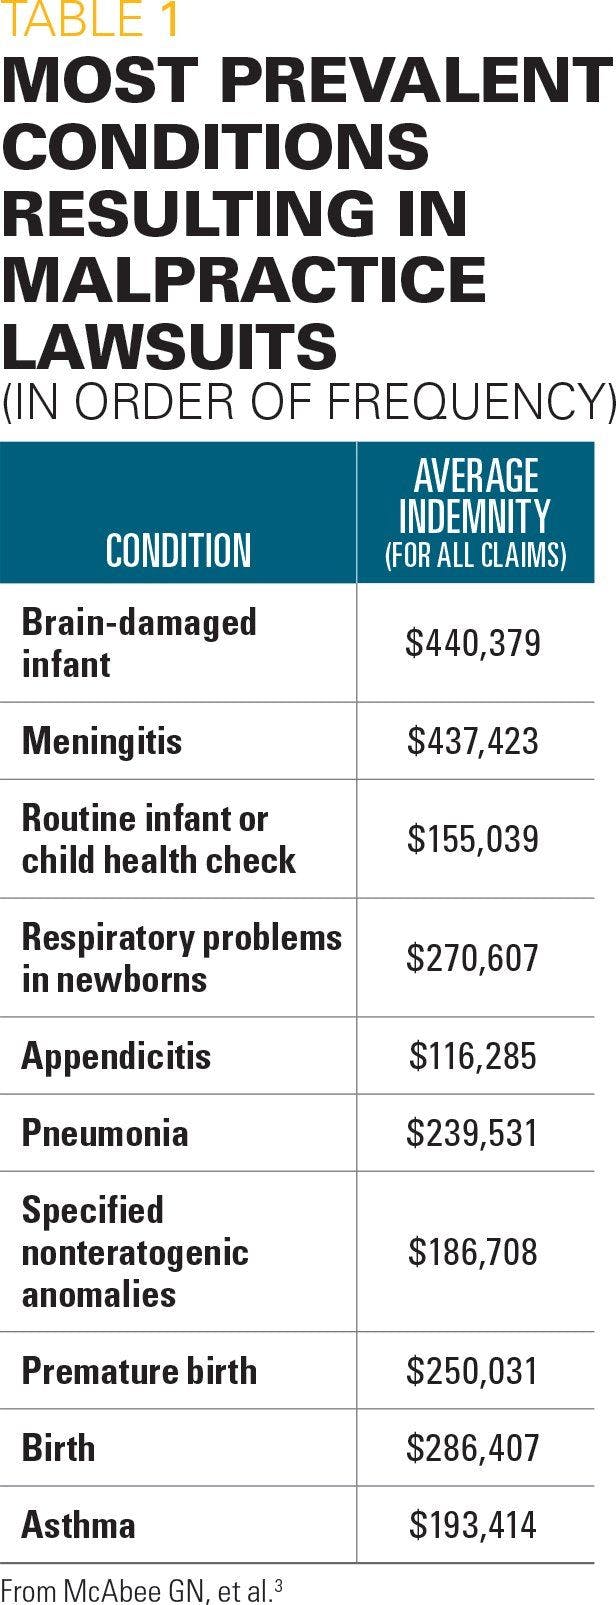 Most prevalent conditions resulting in malpractice lawsuits (in order of frequency)